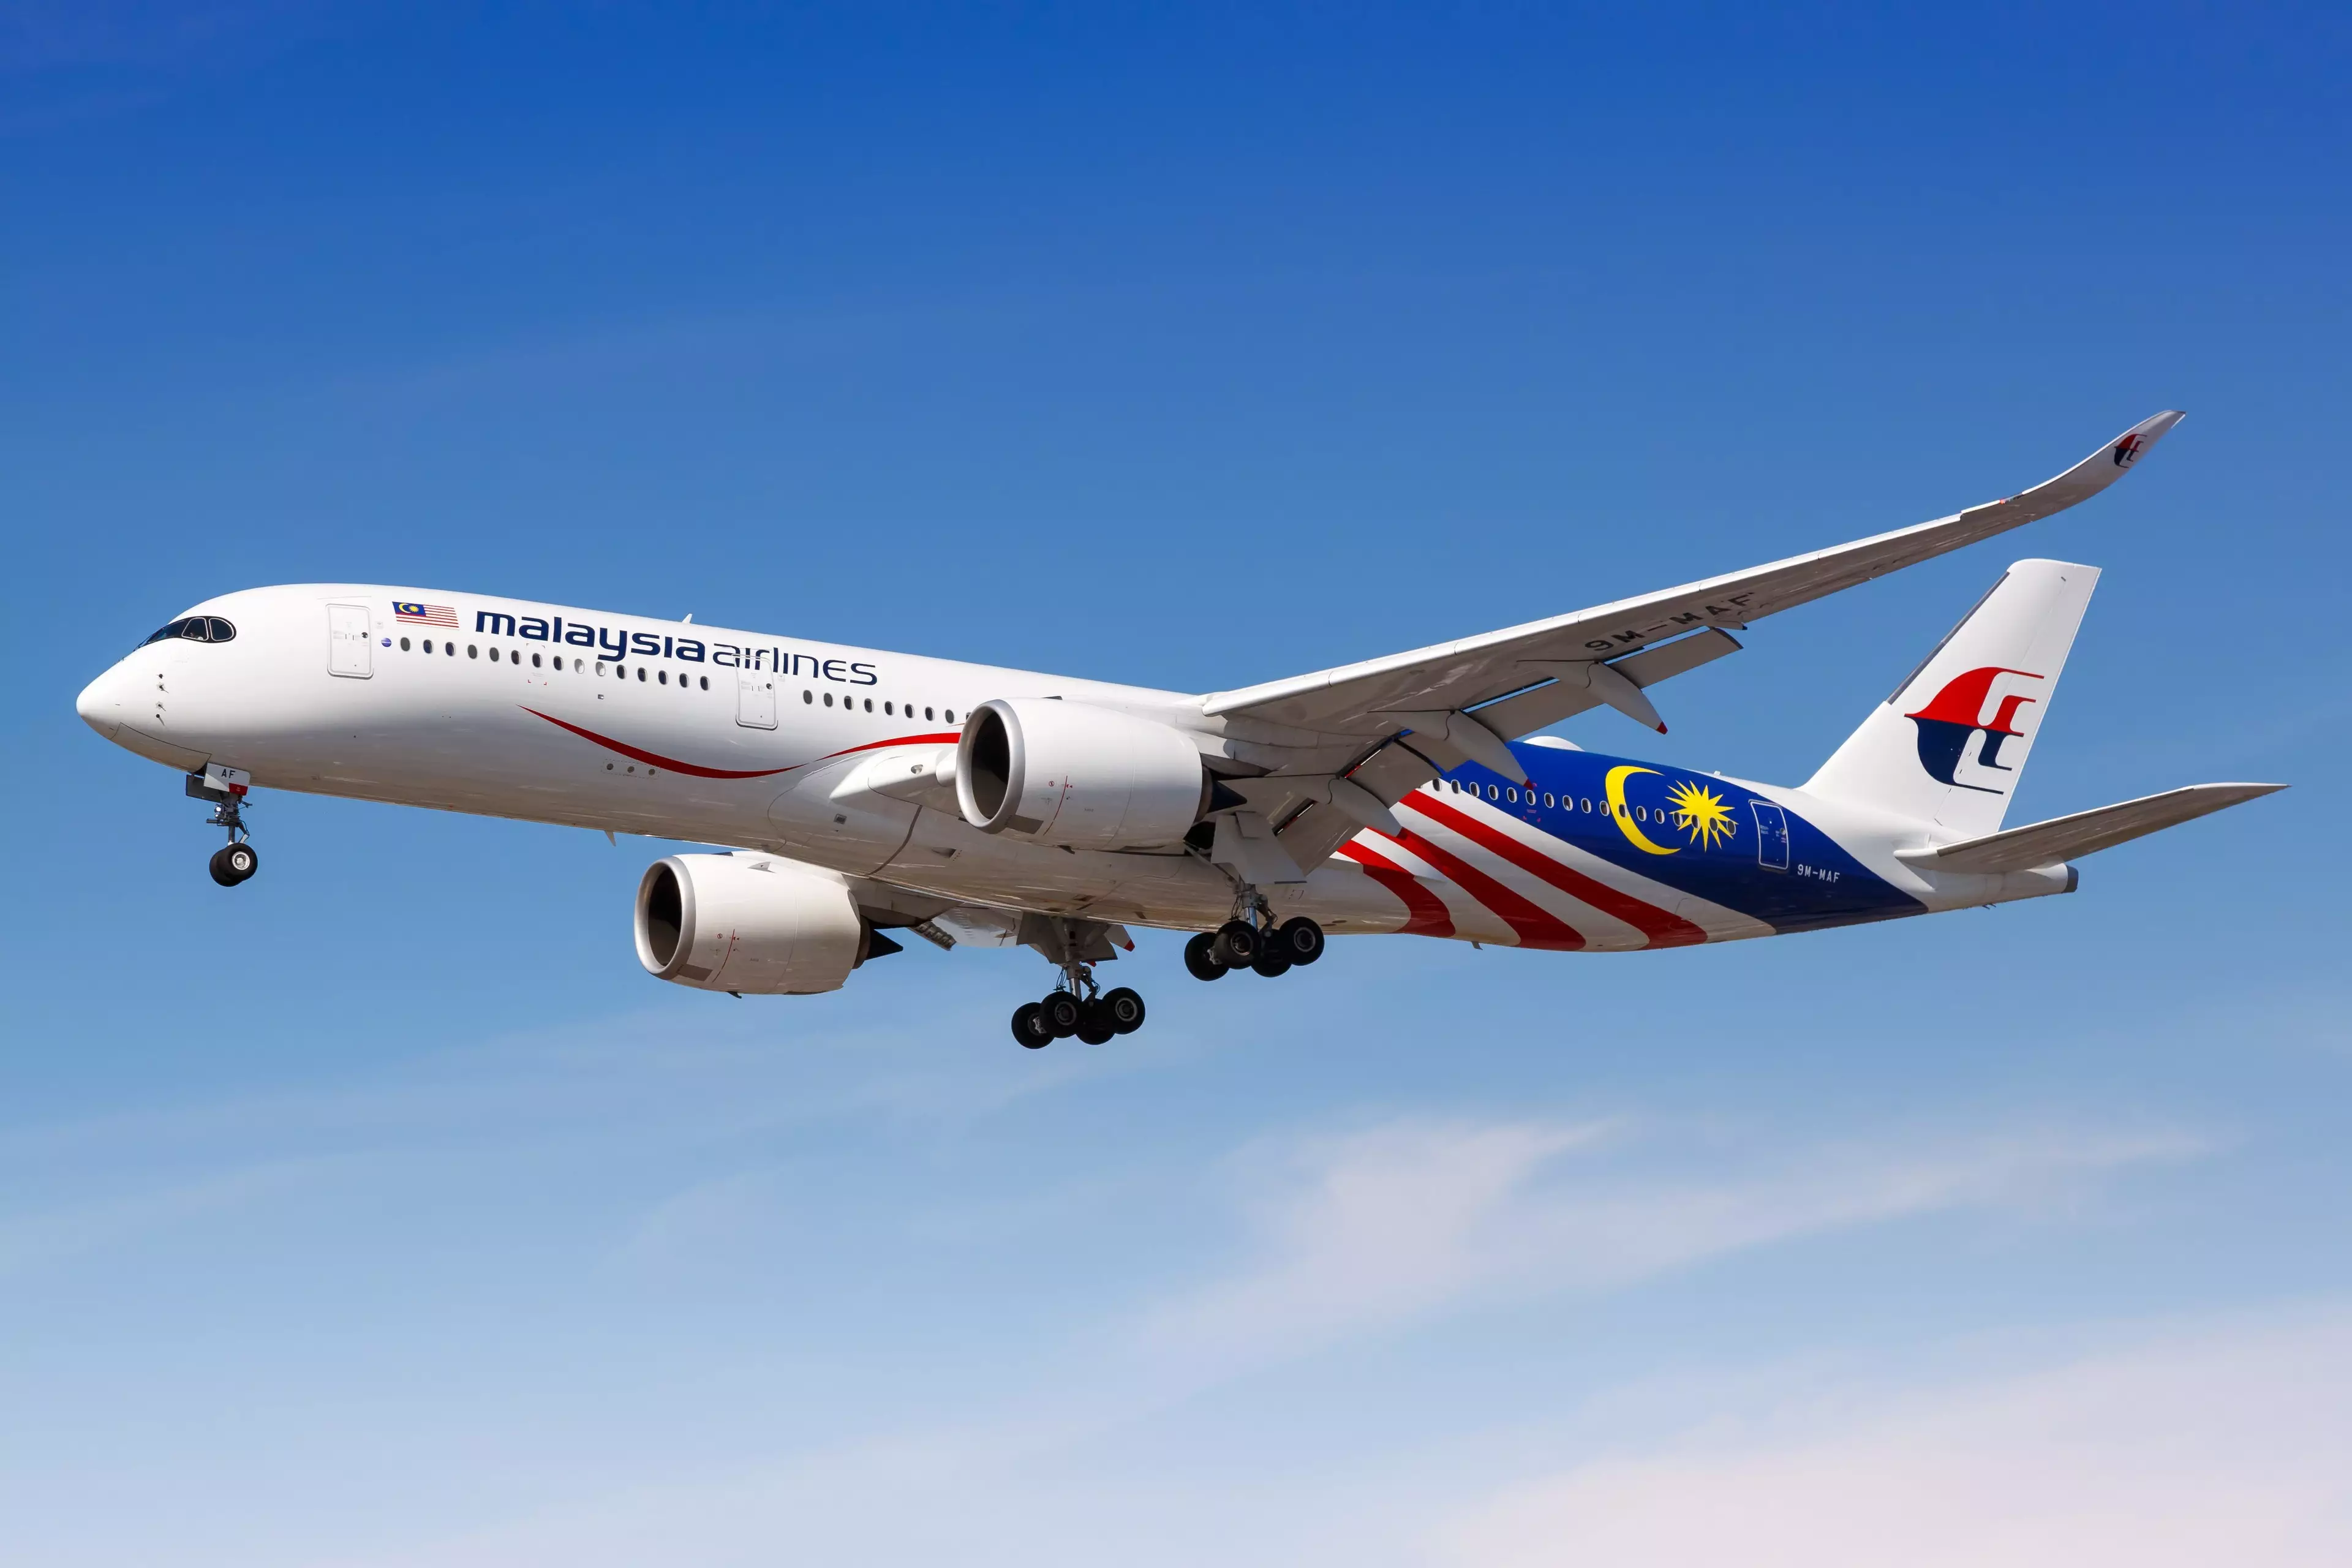 A Malaysia Airlines plane similar to MH370.